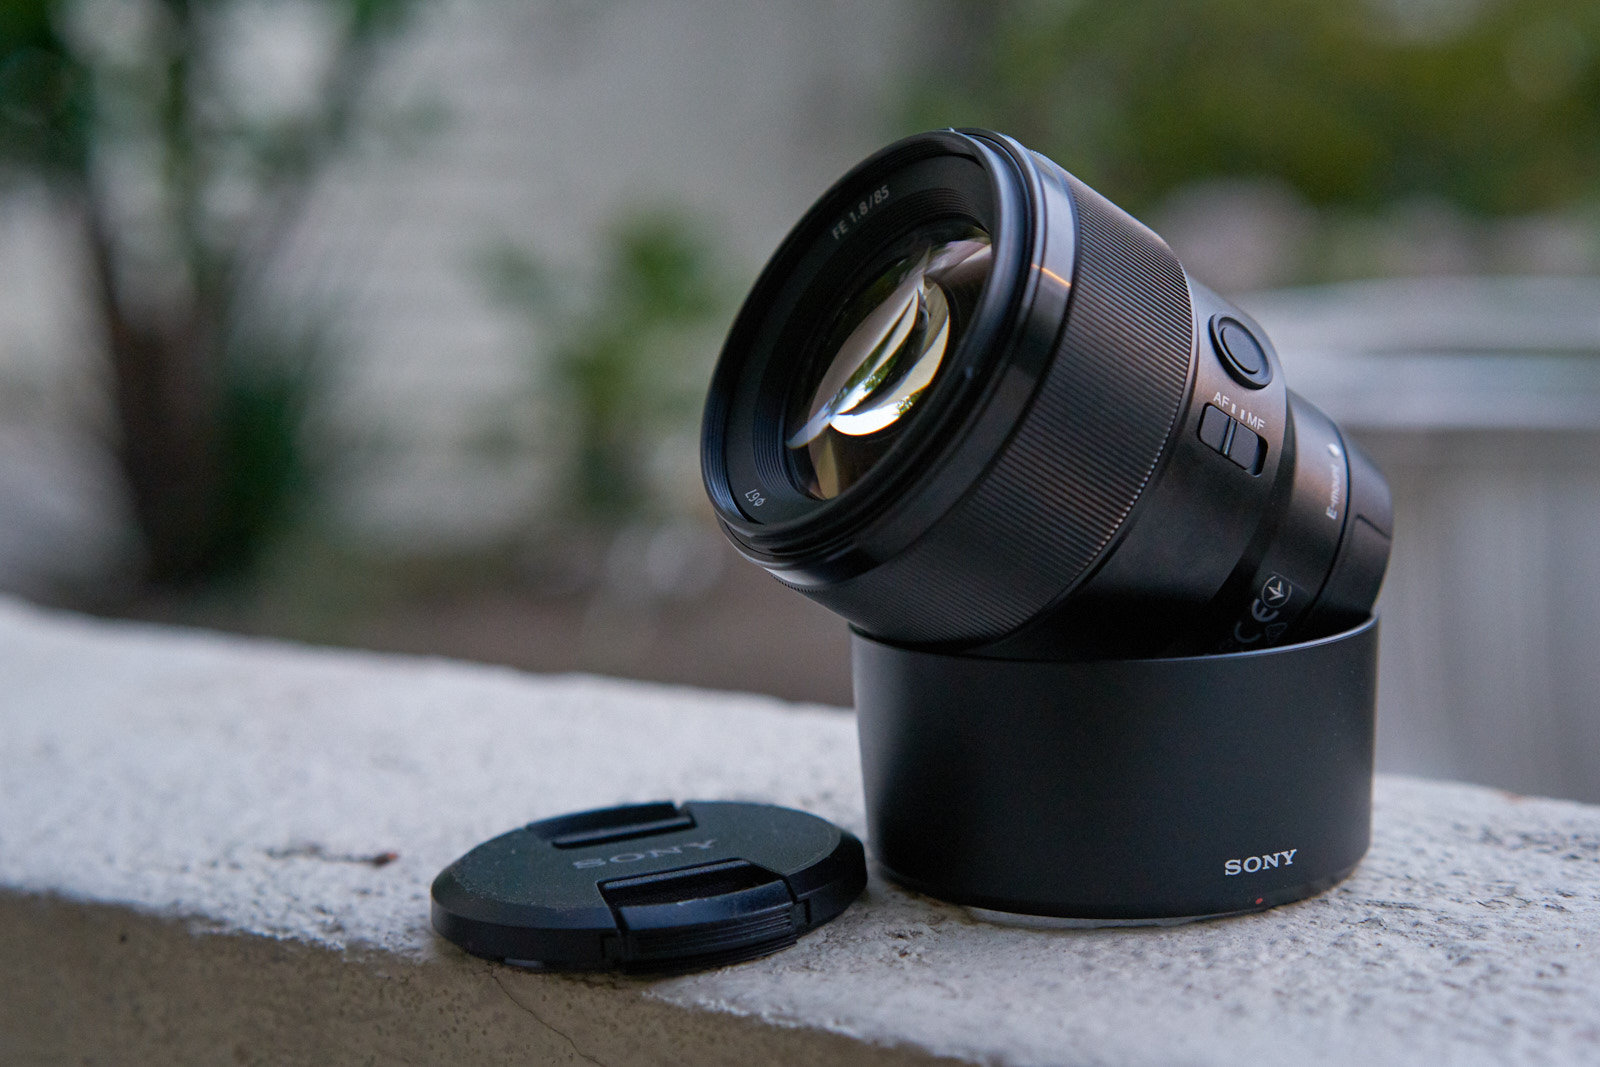 Lens Review: The Sony FE 85mm f/1.8 | Pint Sized Powerhouse